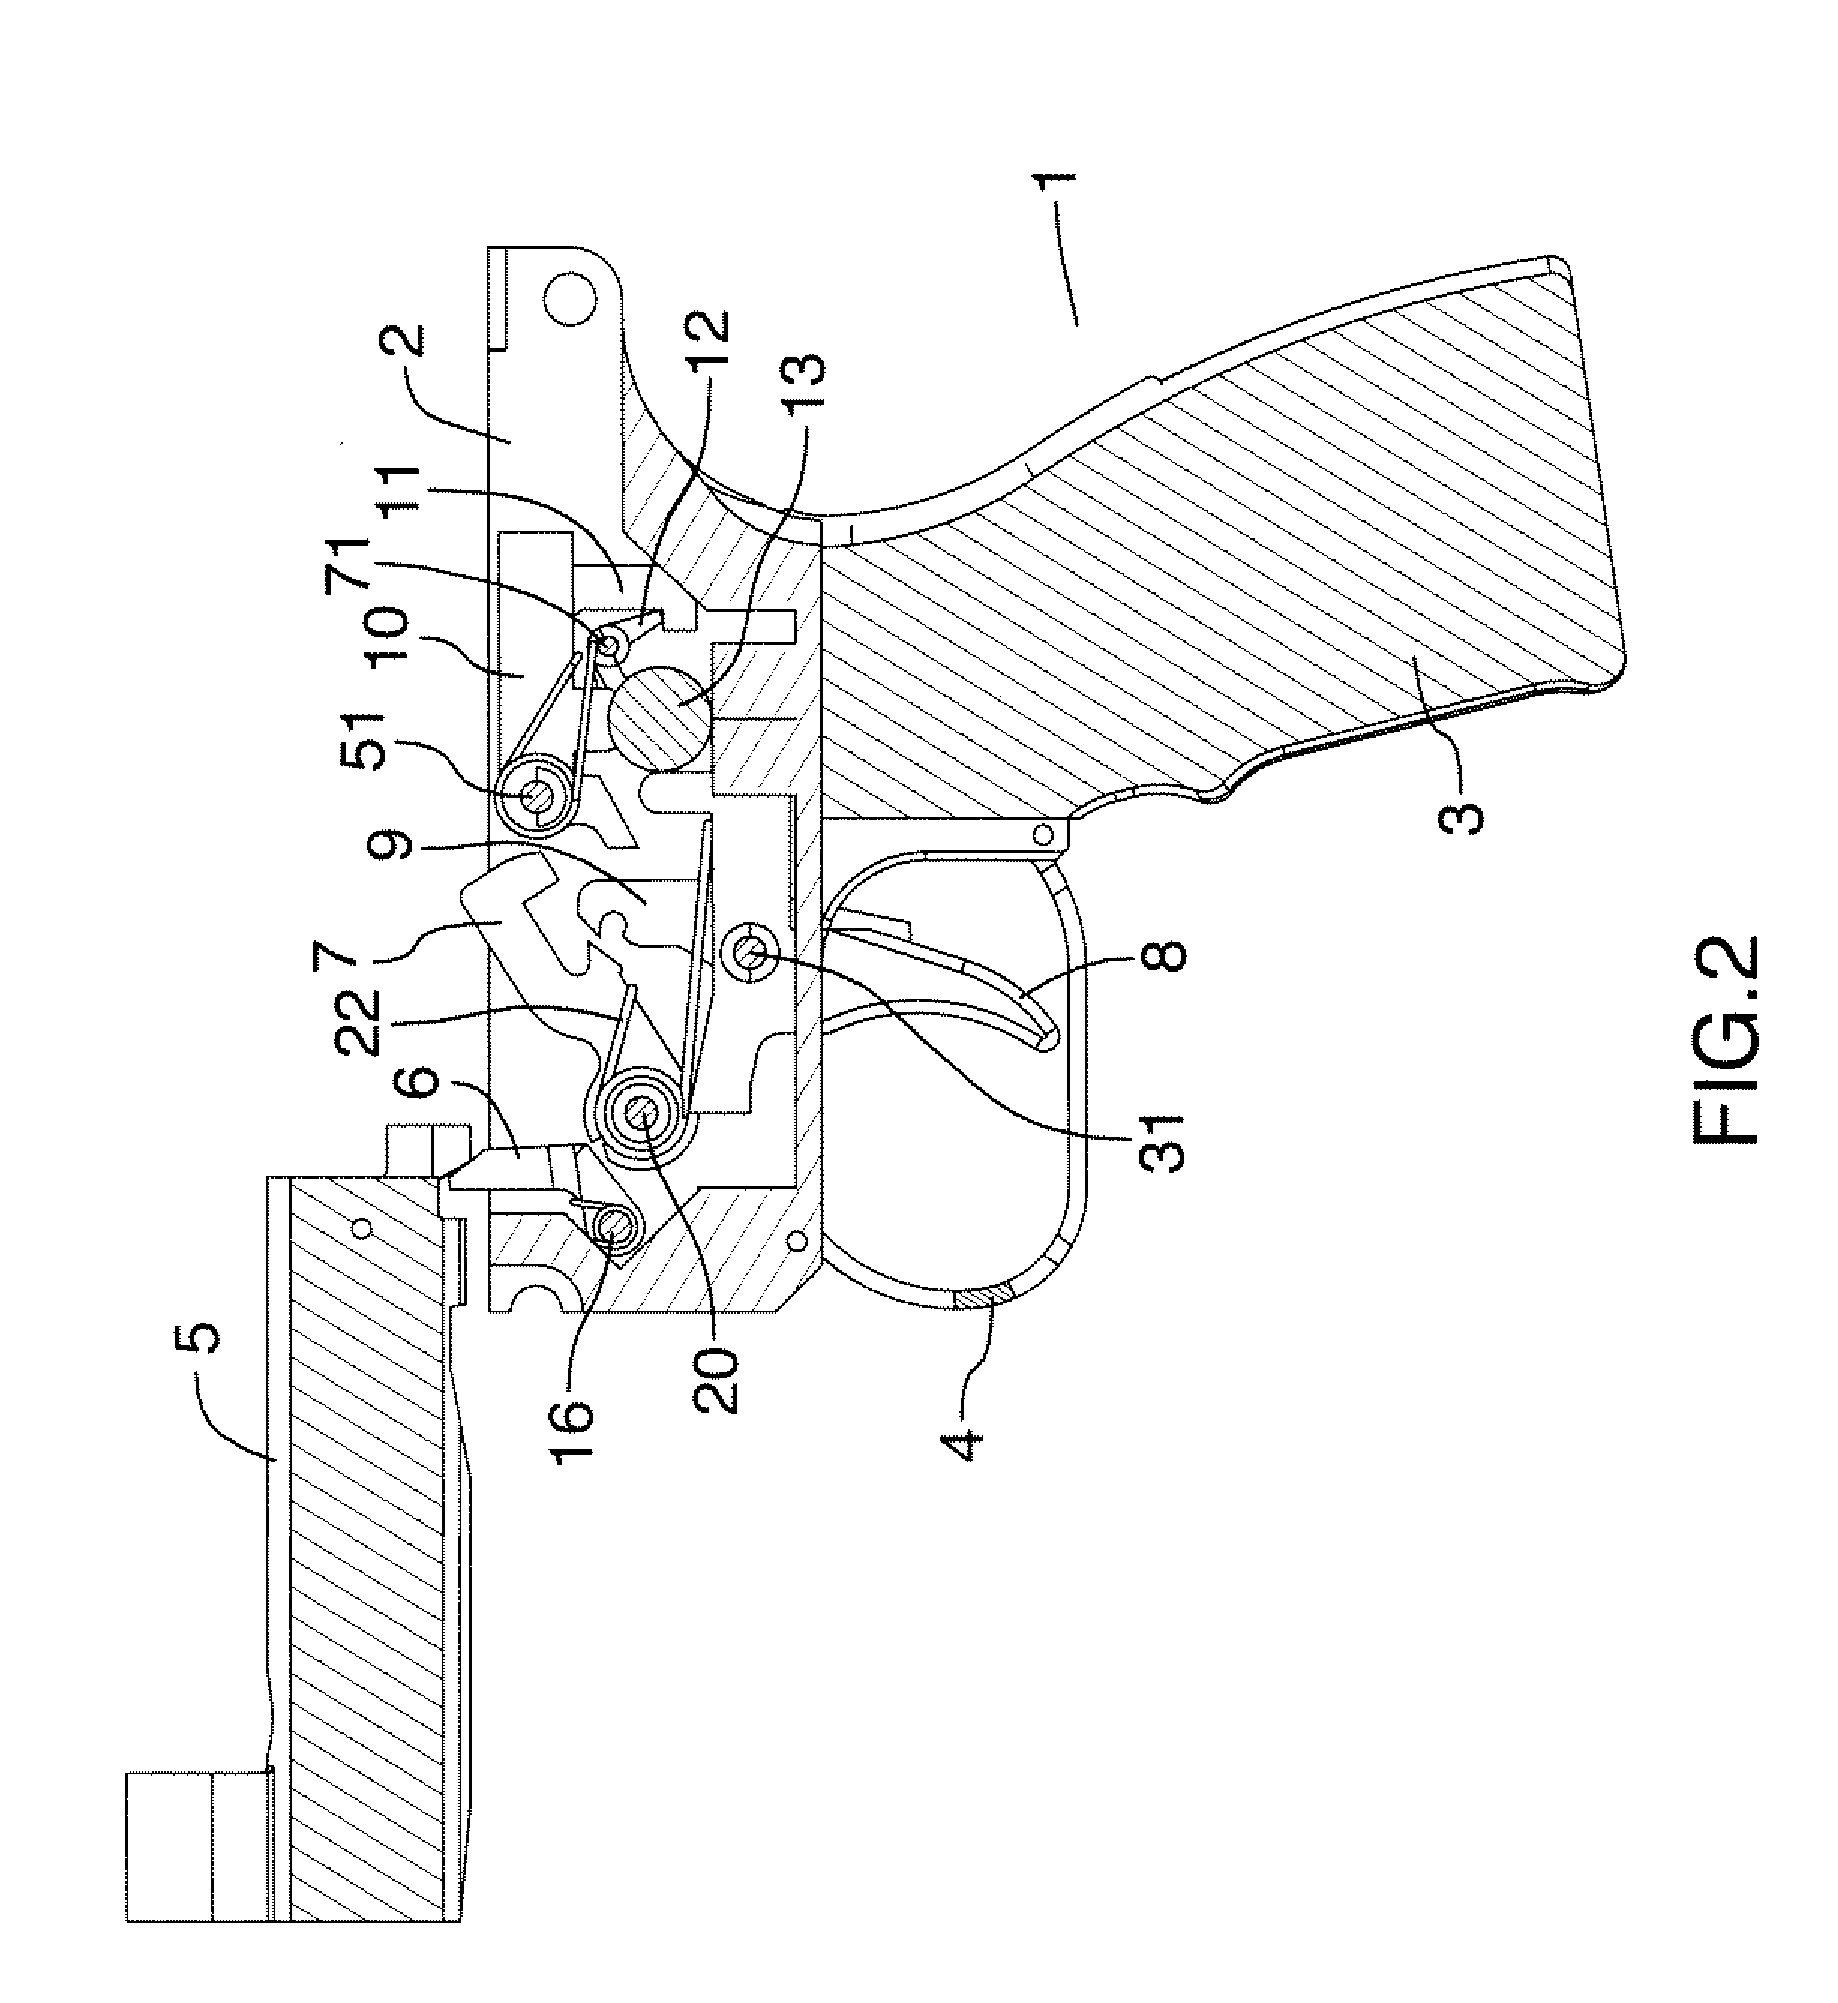 Trigger mechanism for firearms with self-loading actions